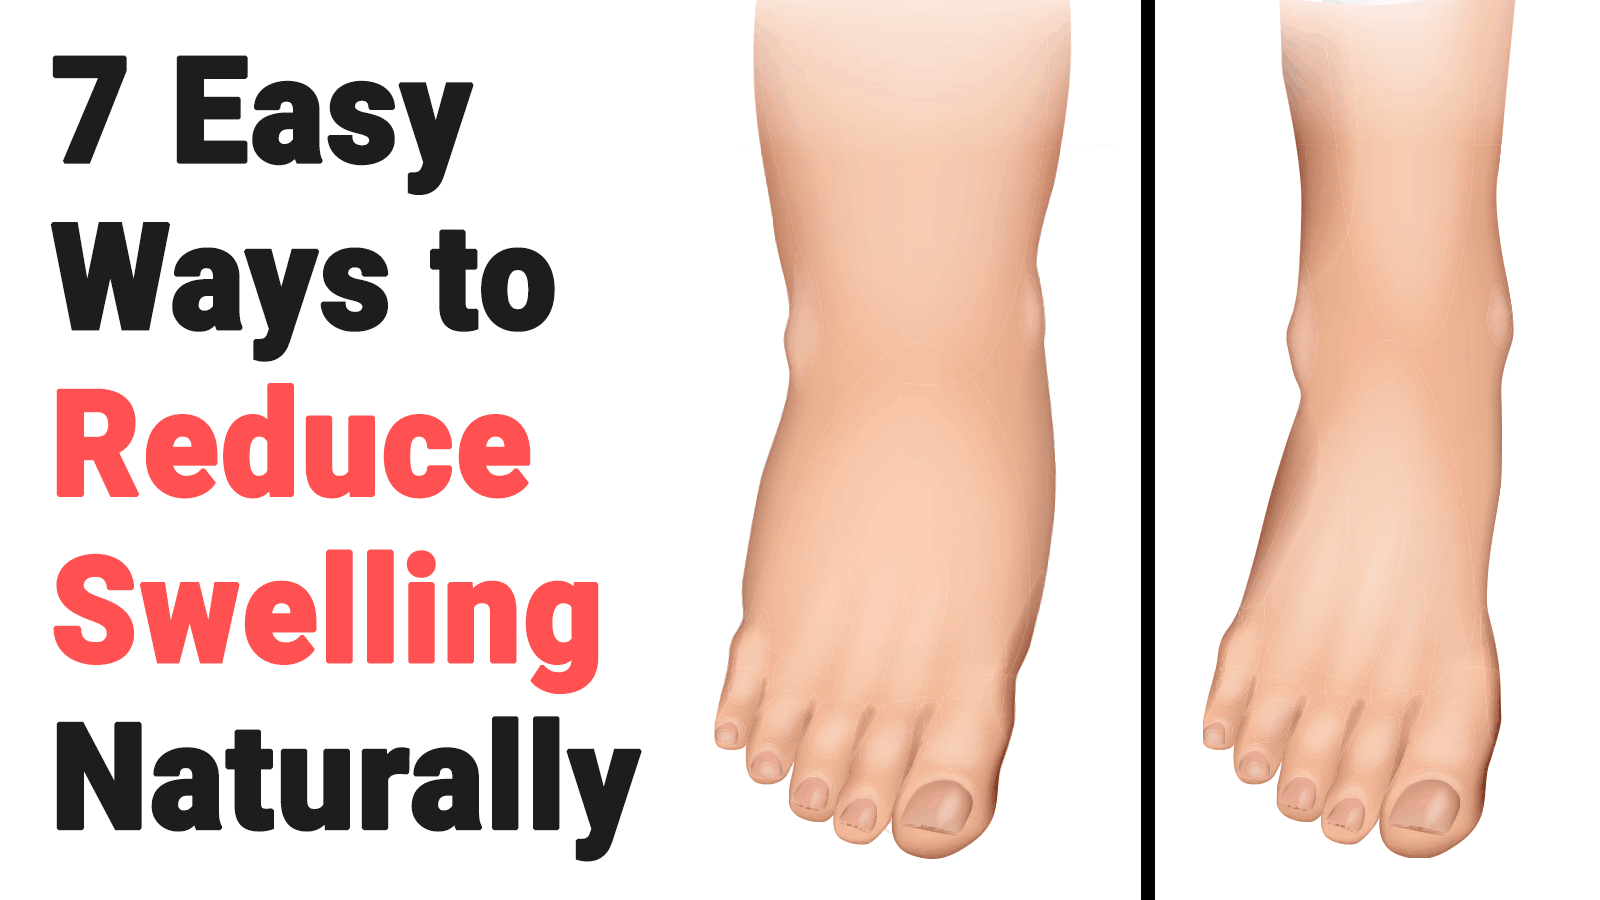 7 Easy Ways to Reduce Swelling Naturally